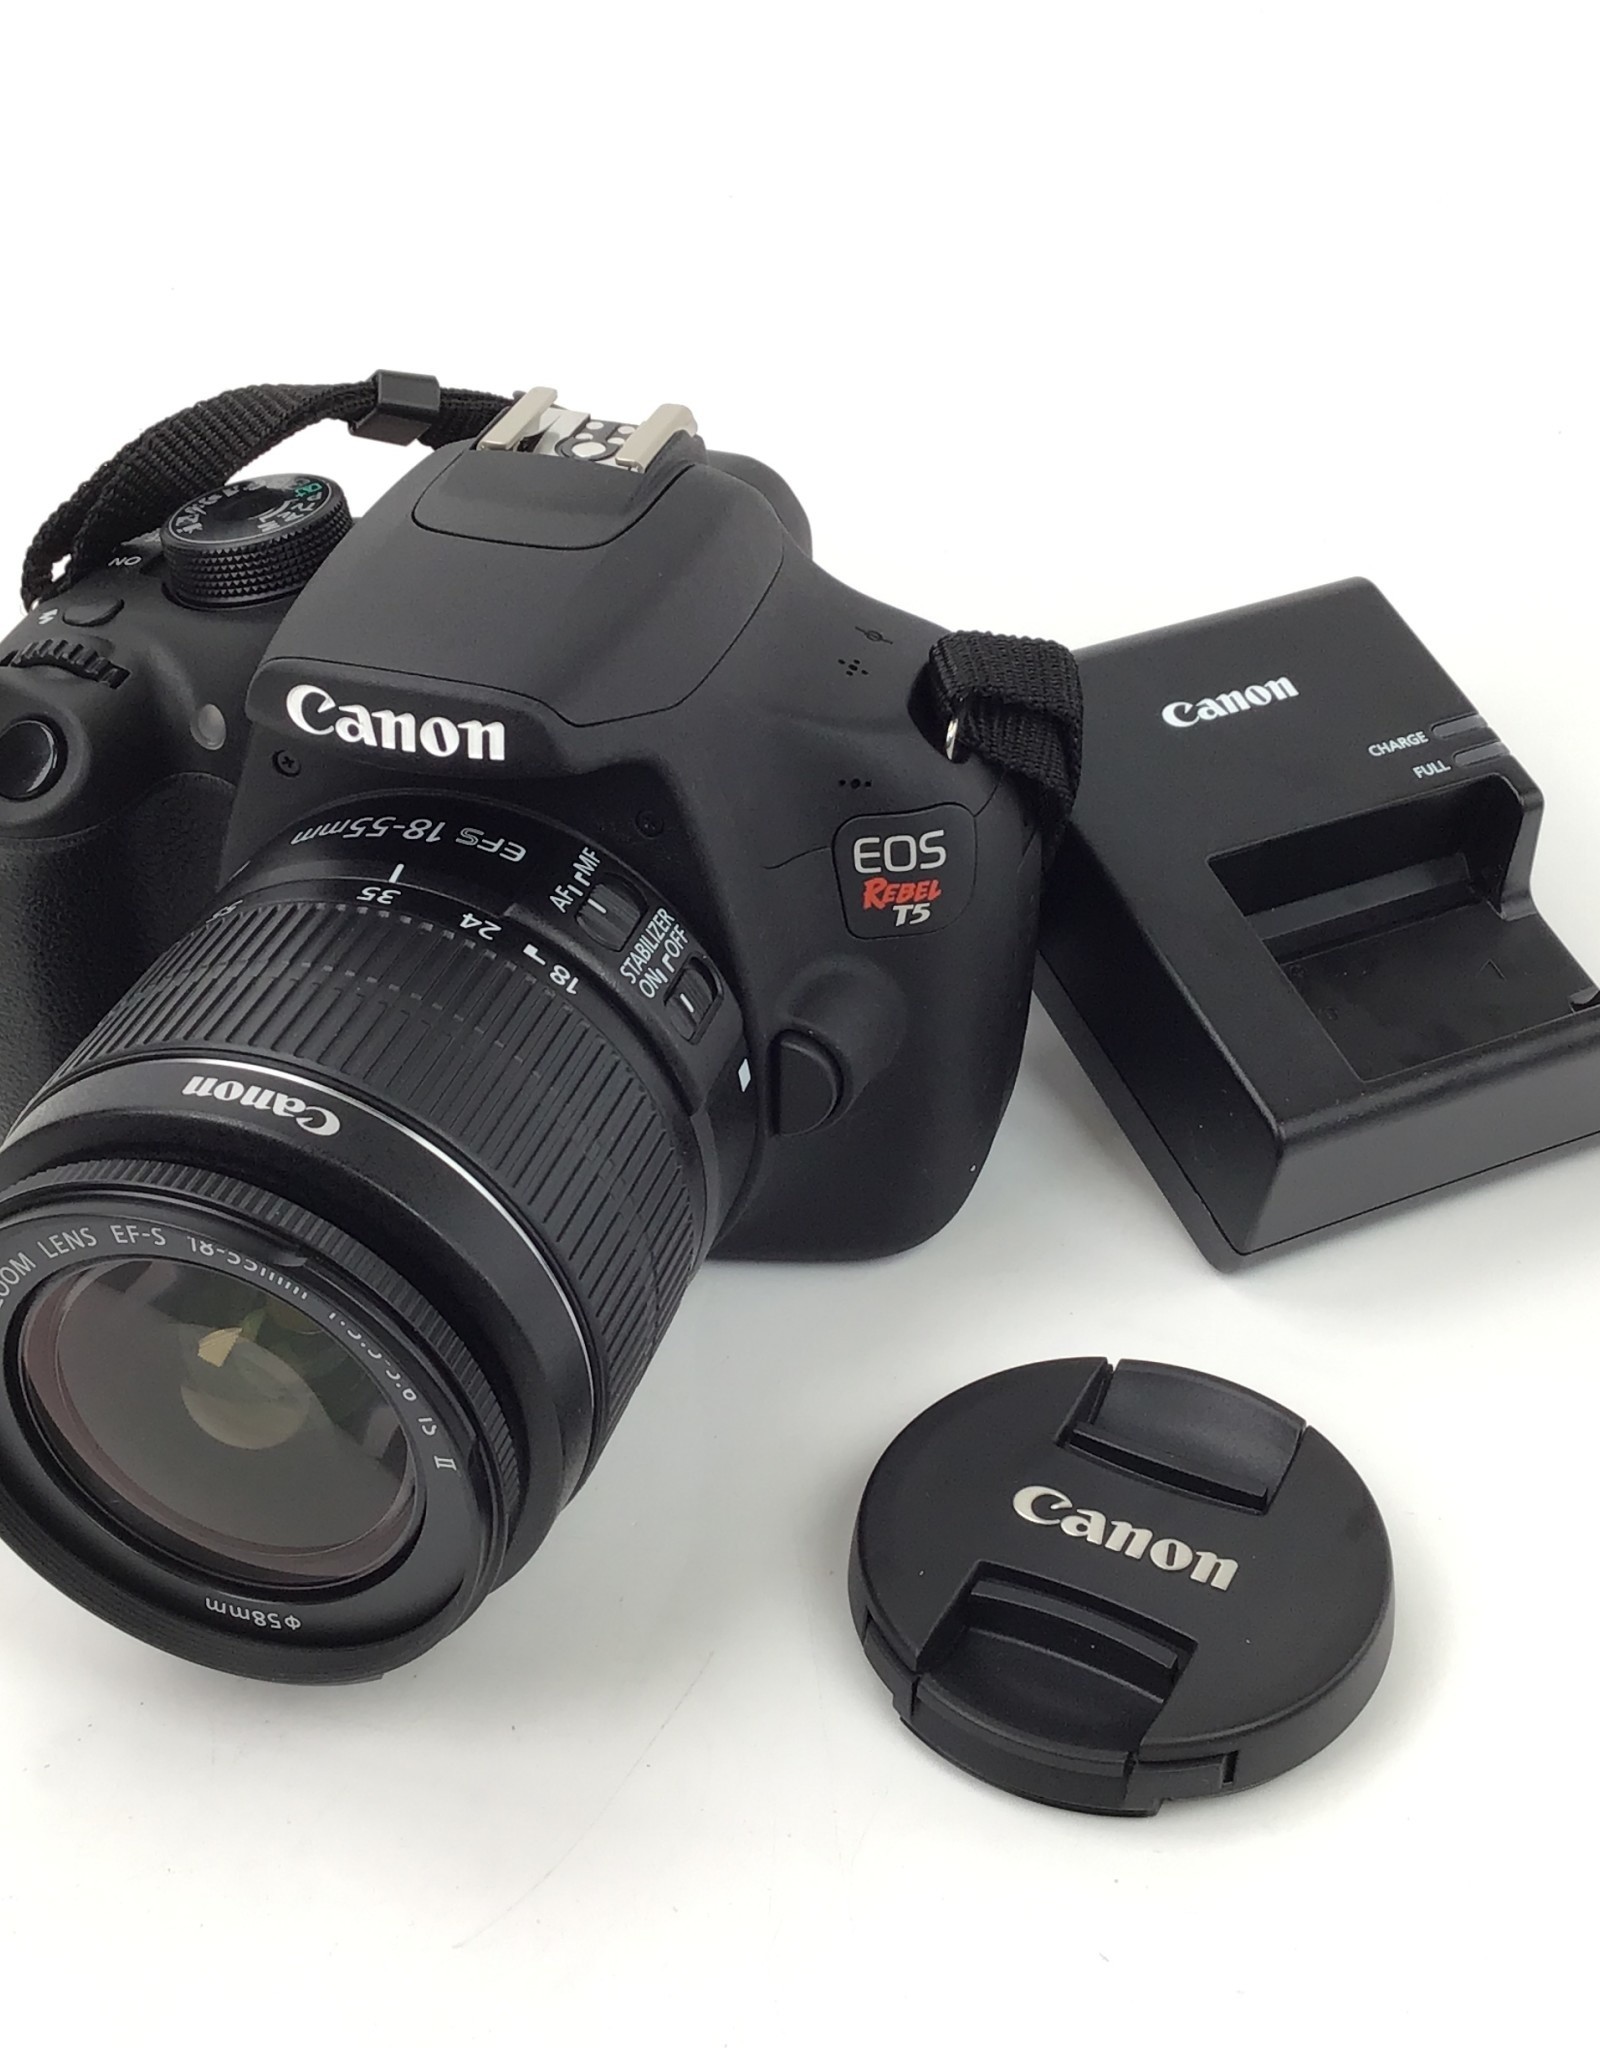 CANON Canon EOS Rebel T5 Camera w/ 18-55mm IS II Used Good